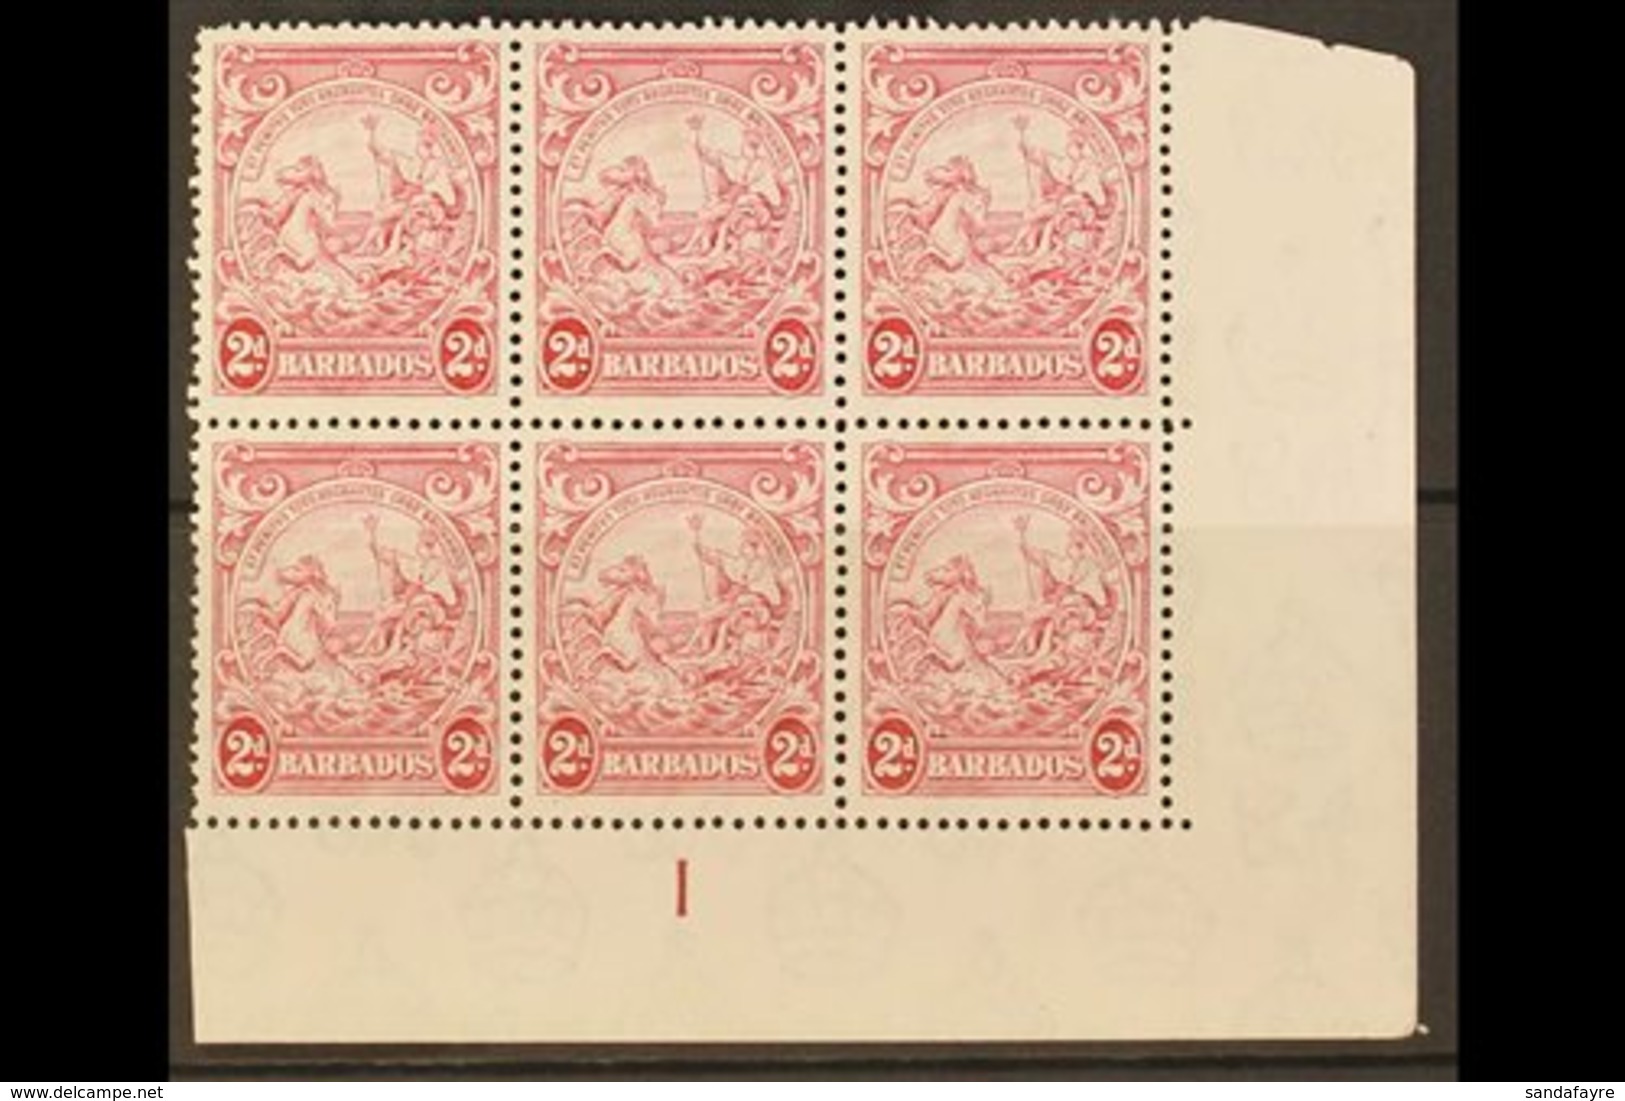 1941 2d Claret Badge Of The Colony, Lower Right Corner Plate 1 Block Of Six, Position 11/9 Showing Extra Frame Line, SG  - Barbados (...-1966)